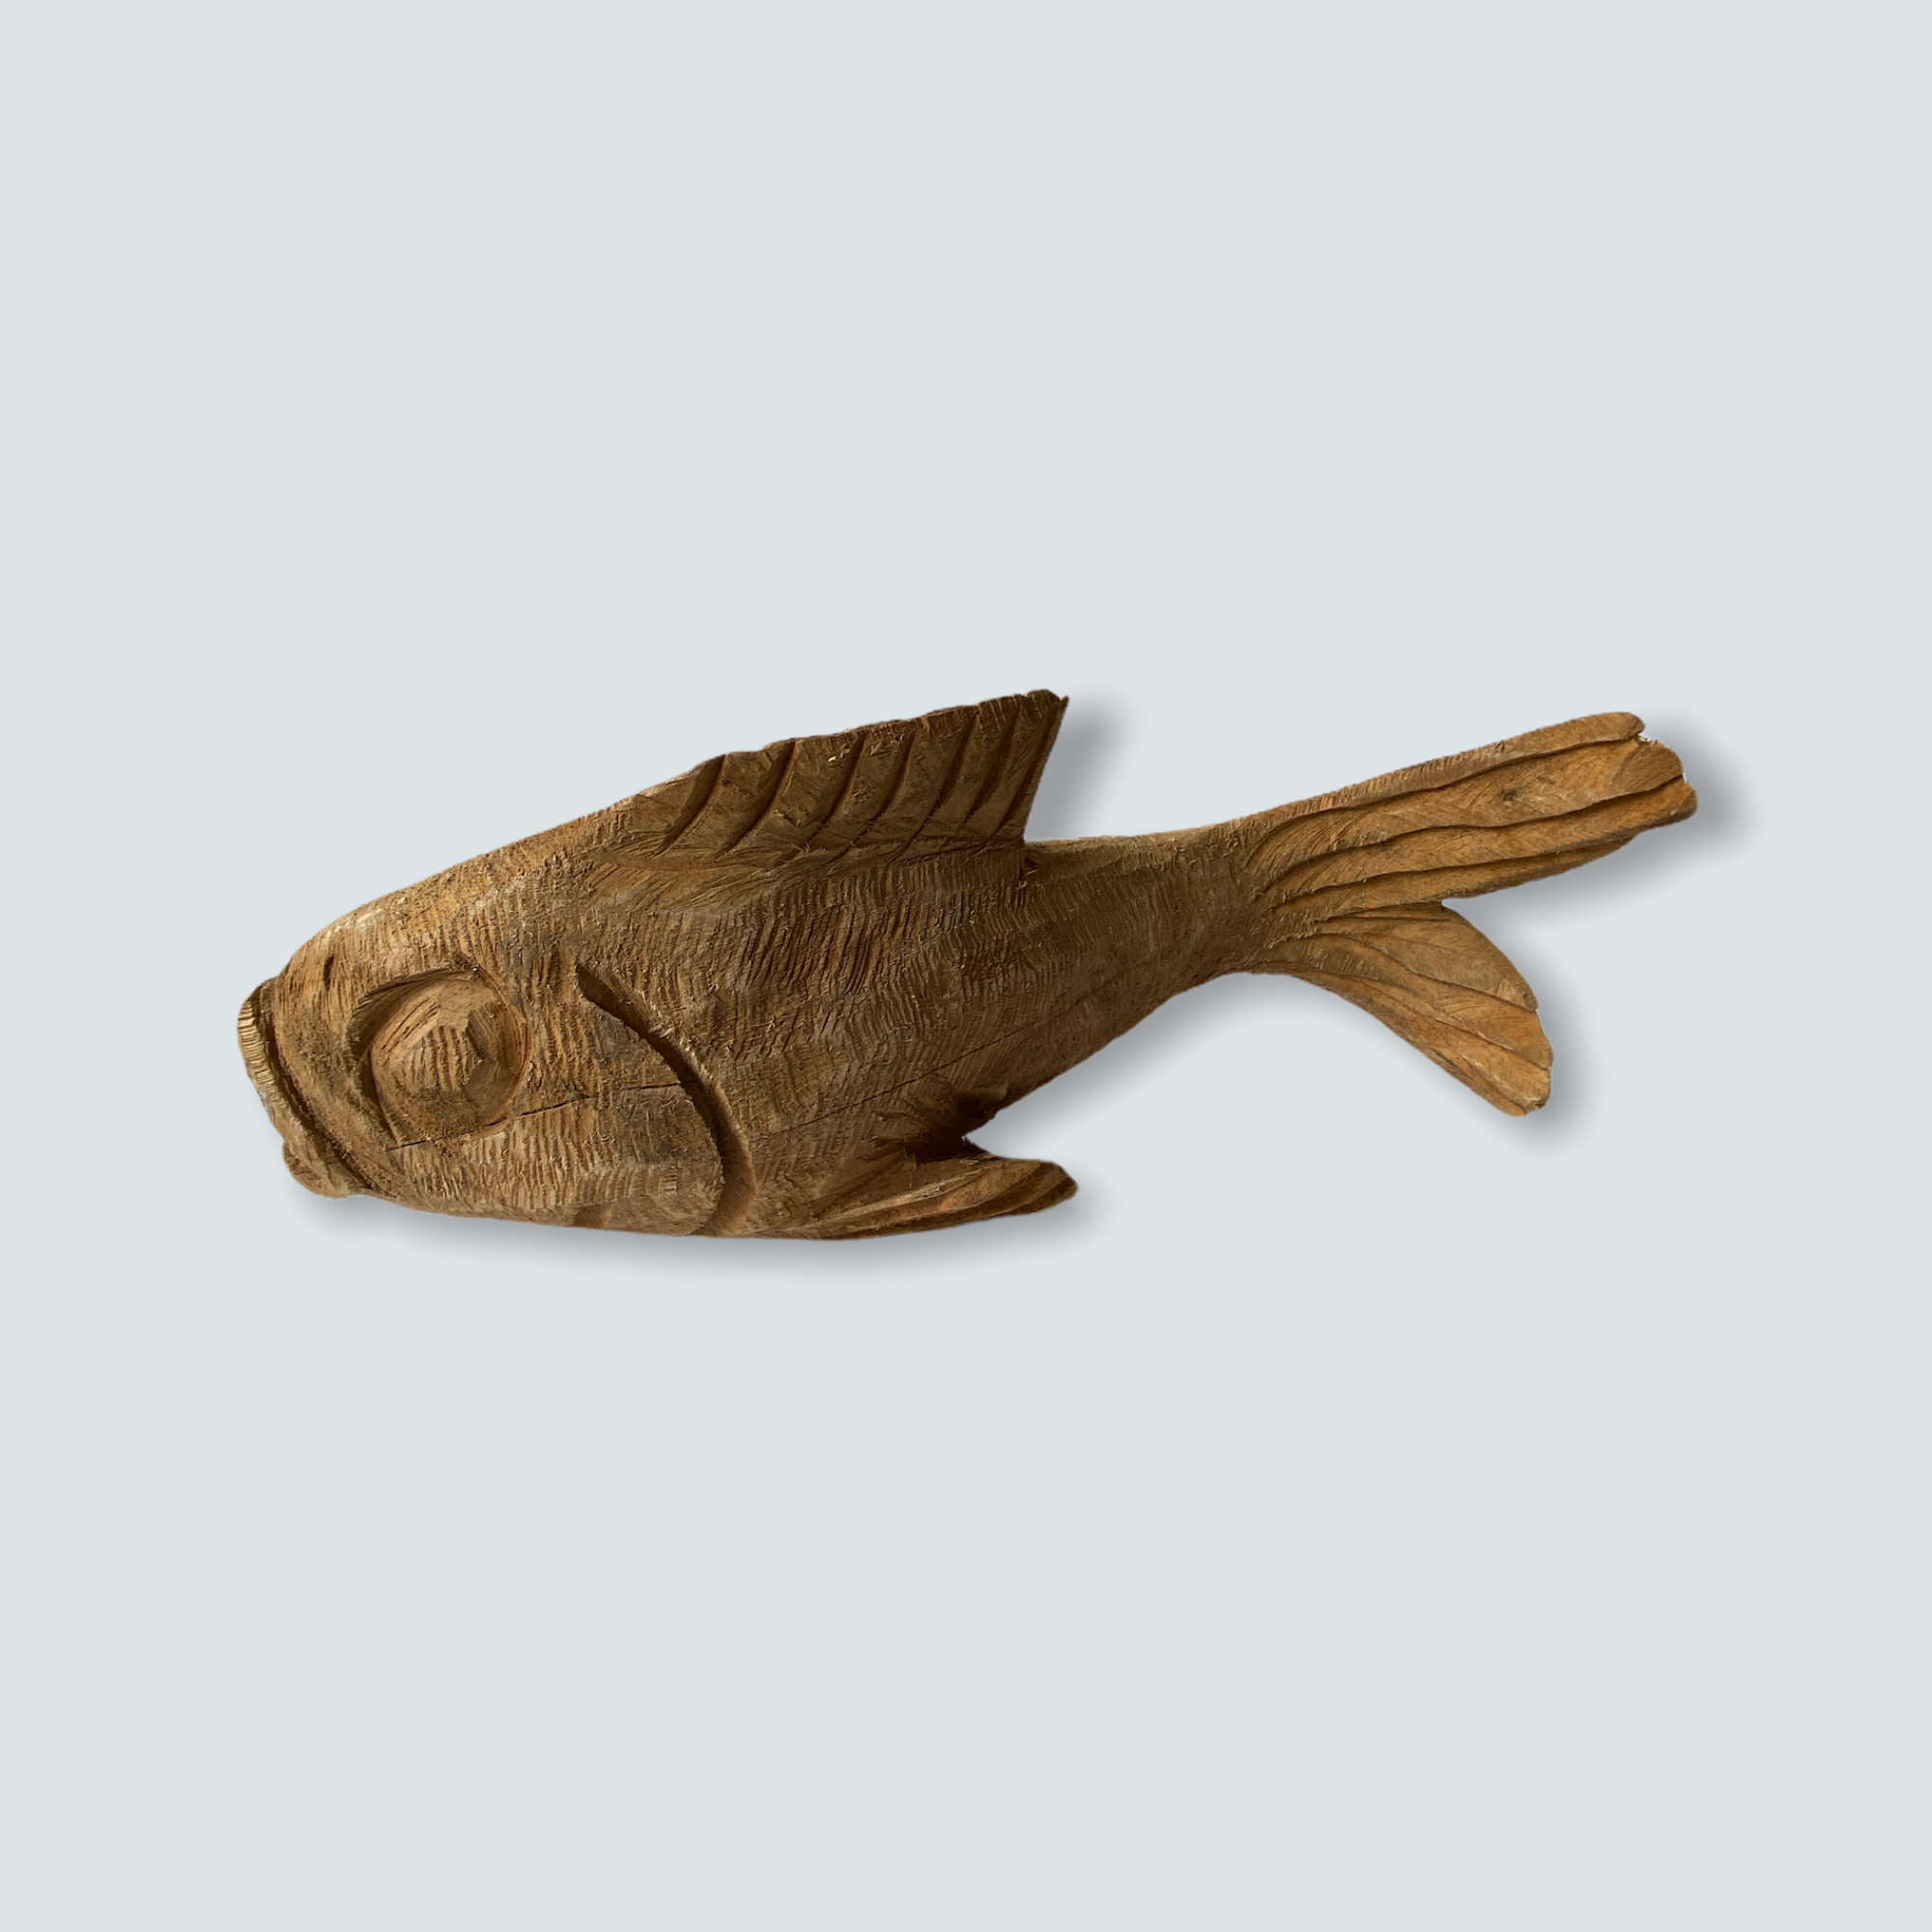 Botanical Boys Mozambique Hand Carved Fish Sculpture XS 02